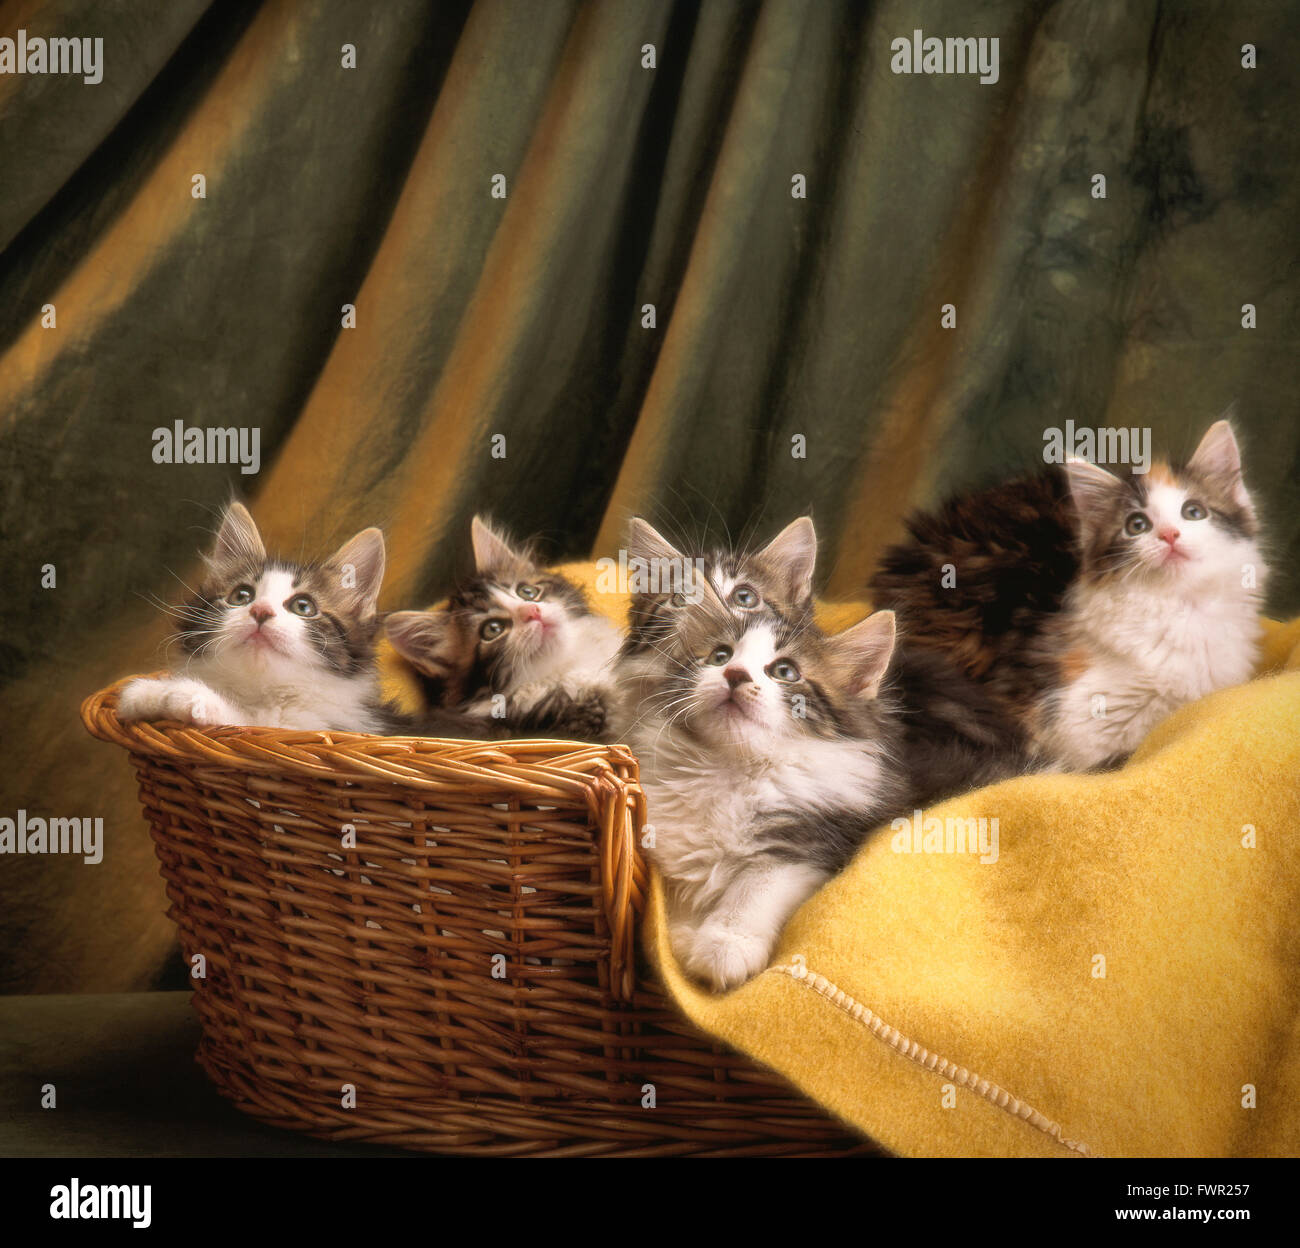 Basket of maine coon cats Stock Photo